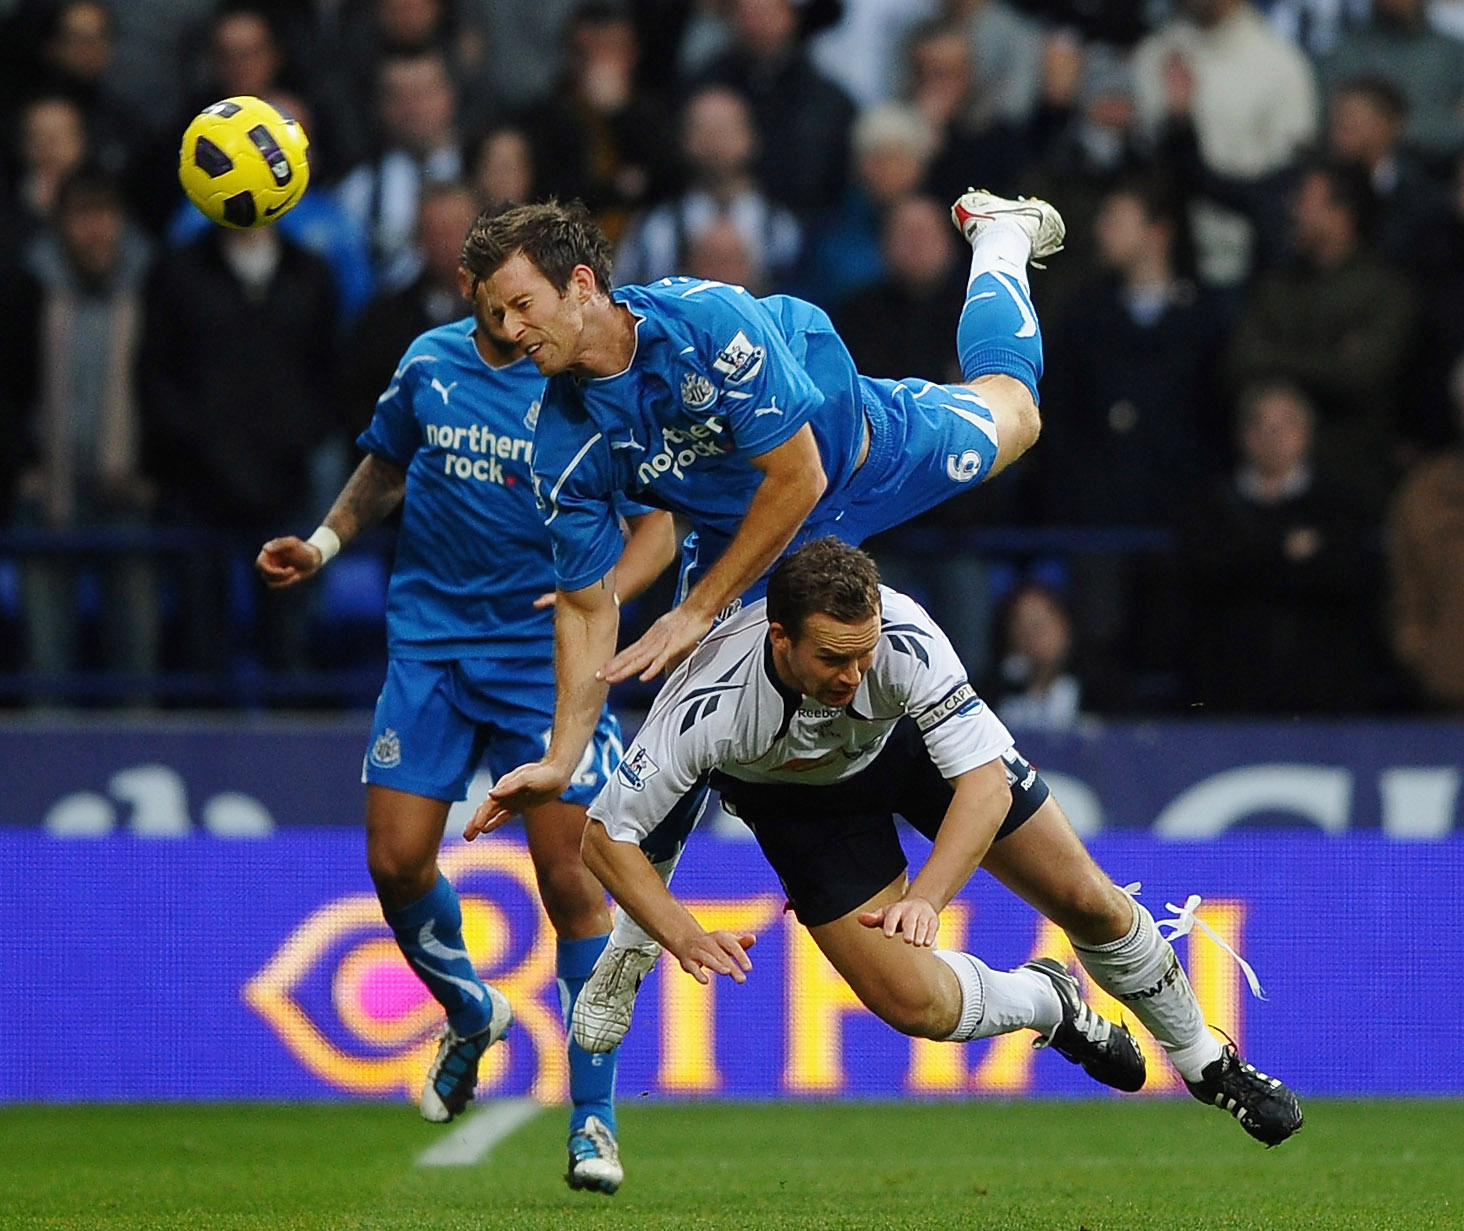 BOLTON, ENGLAND - NOVEMBER 20: Kevin Davies of Bolton Wanderers battles with Michael Williamson of Newcastle United during the Barclays Premier League match between Bolton Wanderers and Newcastle United at the Reebok Stadium on November 20, 2010 in Bolton